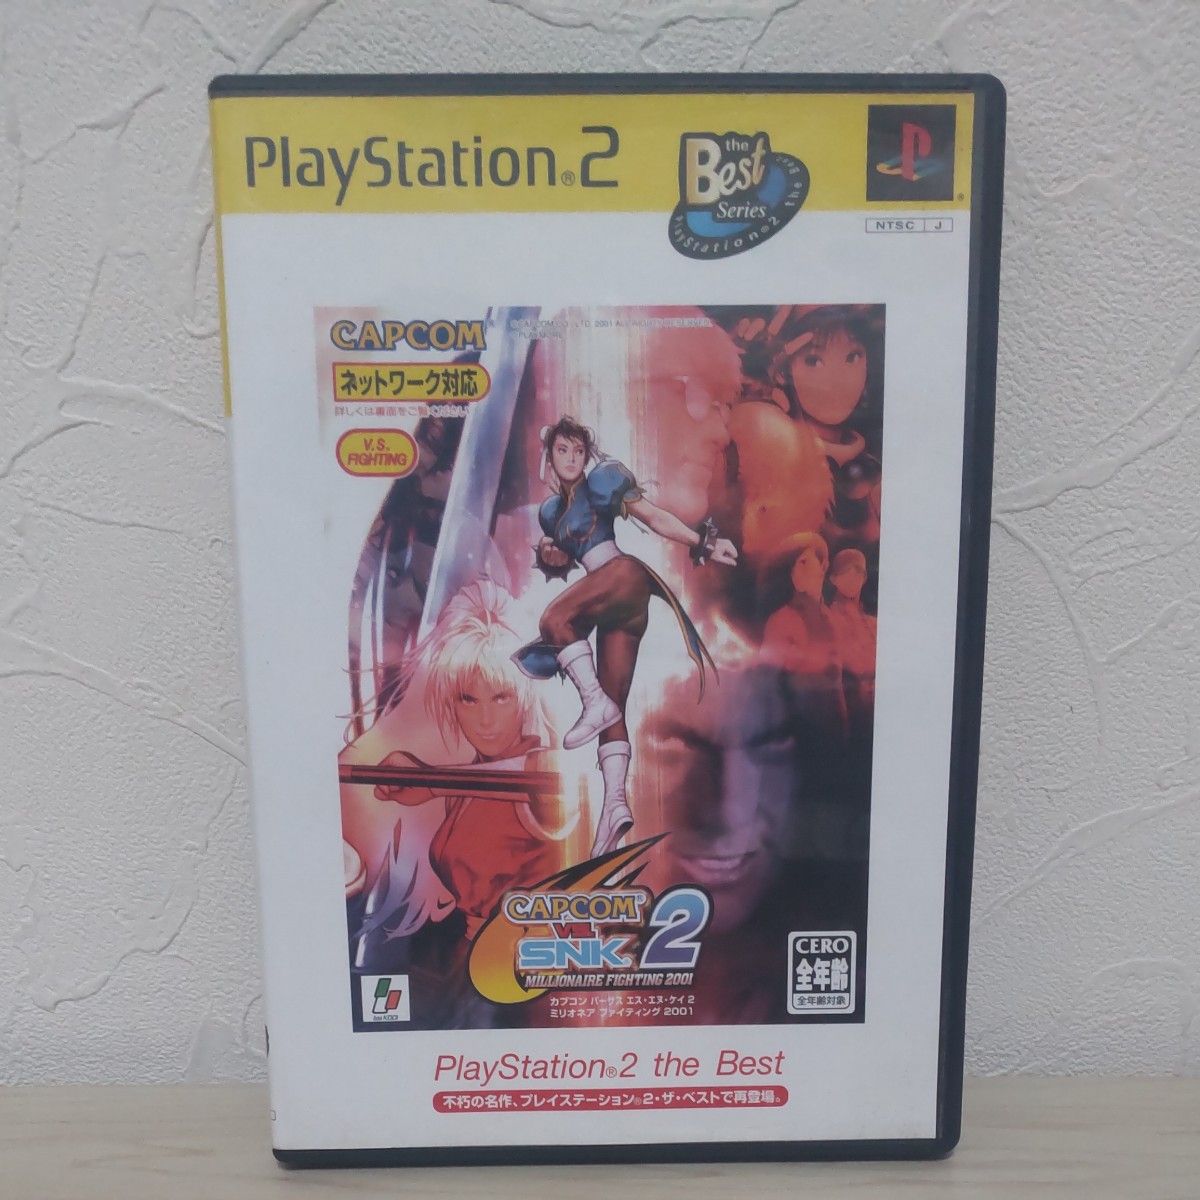 CAPCOM vs. SNK2 MILLIONAIRE FIGHTING 2001 PlayStation 2 the Best